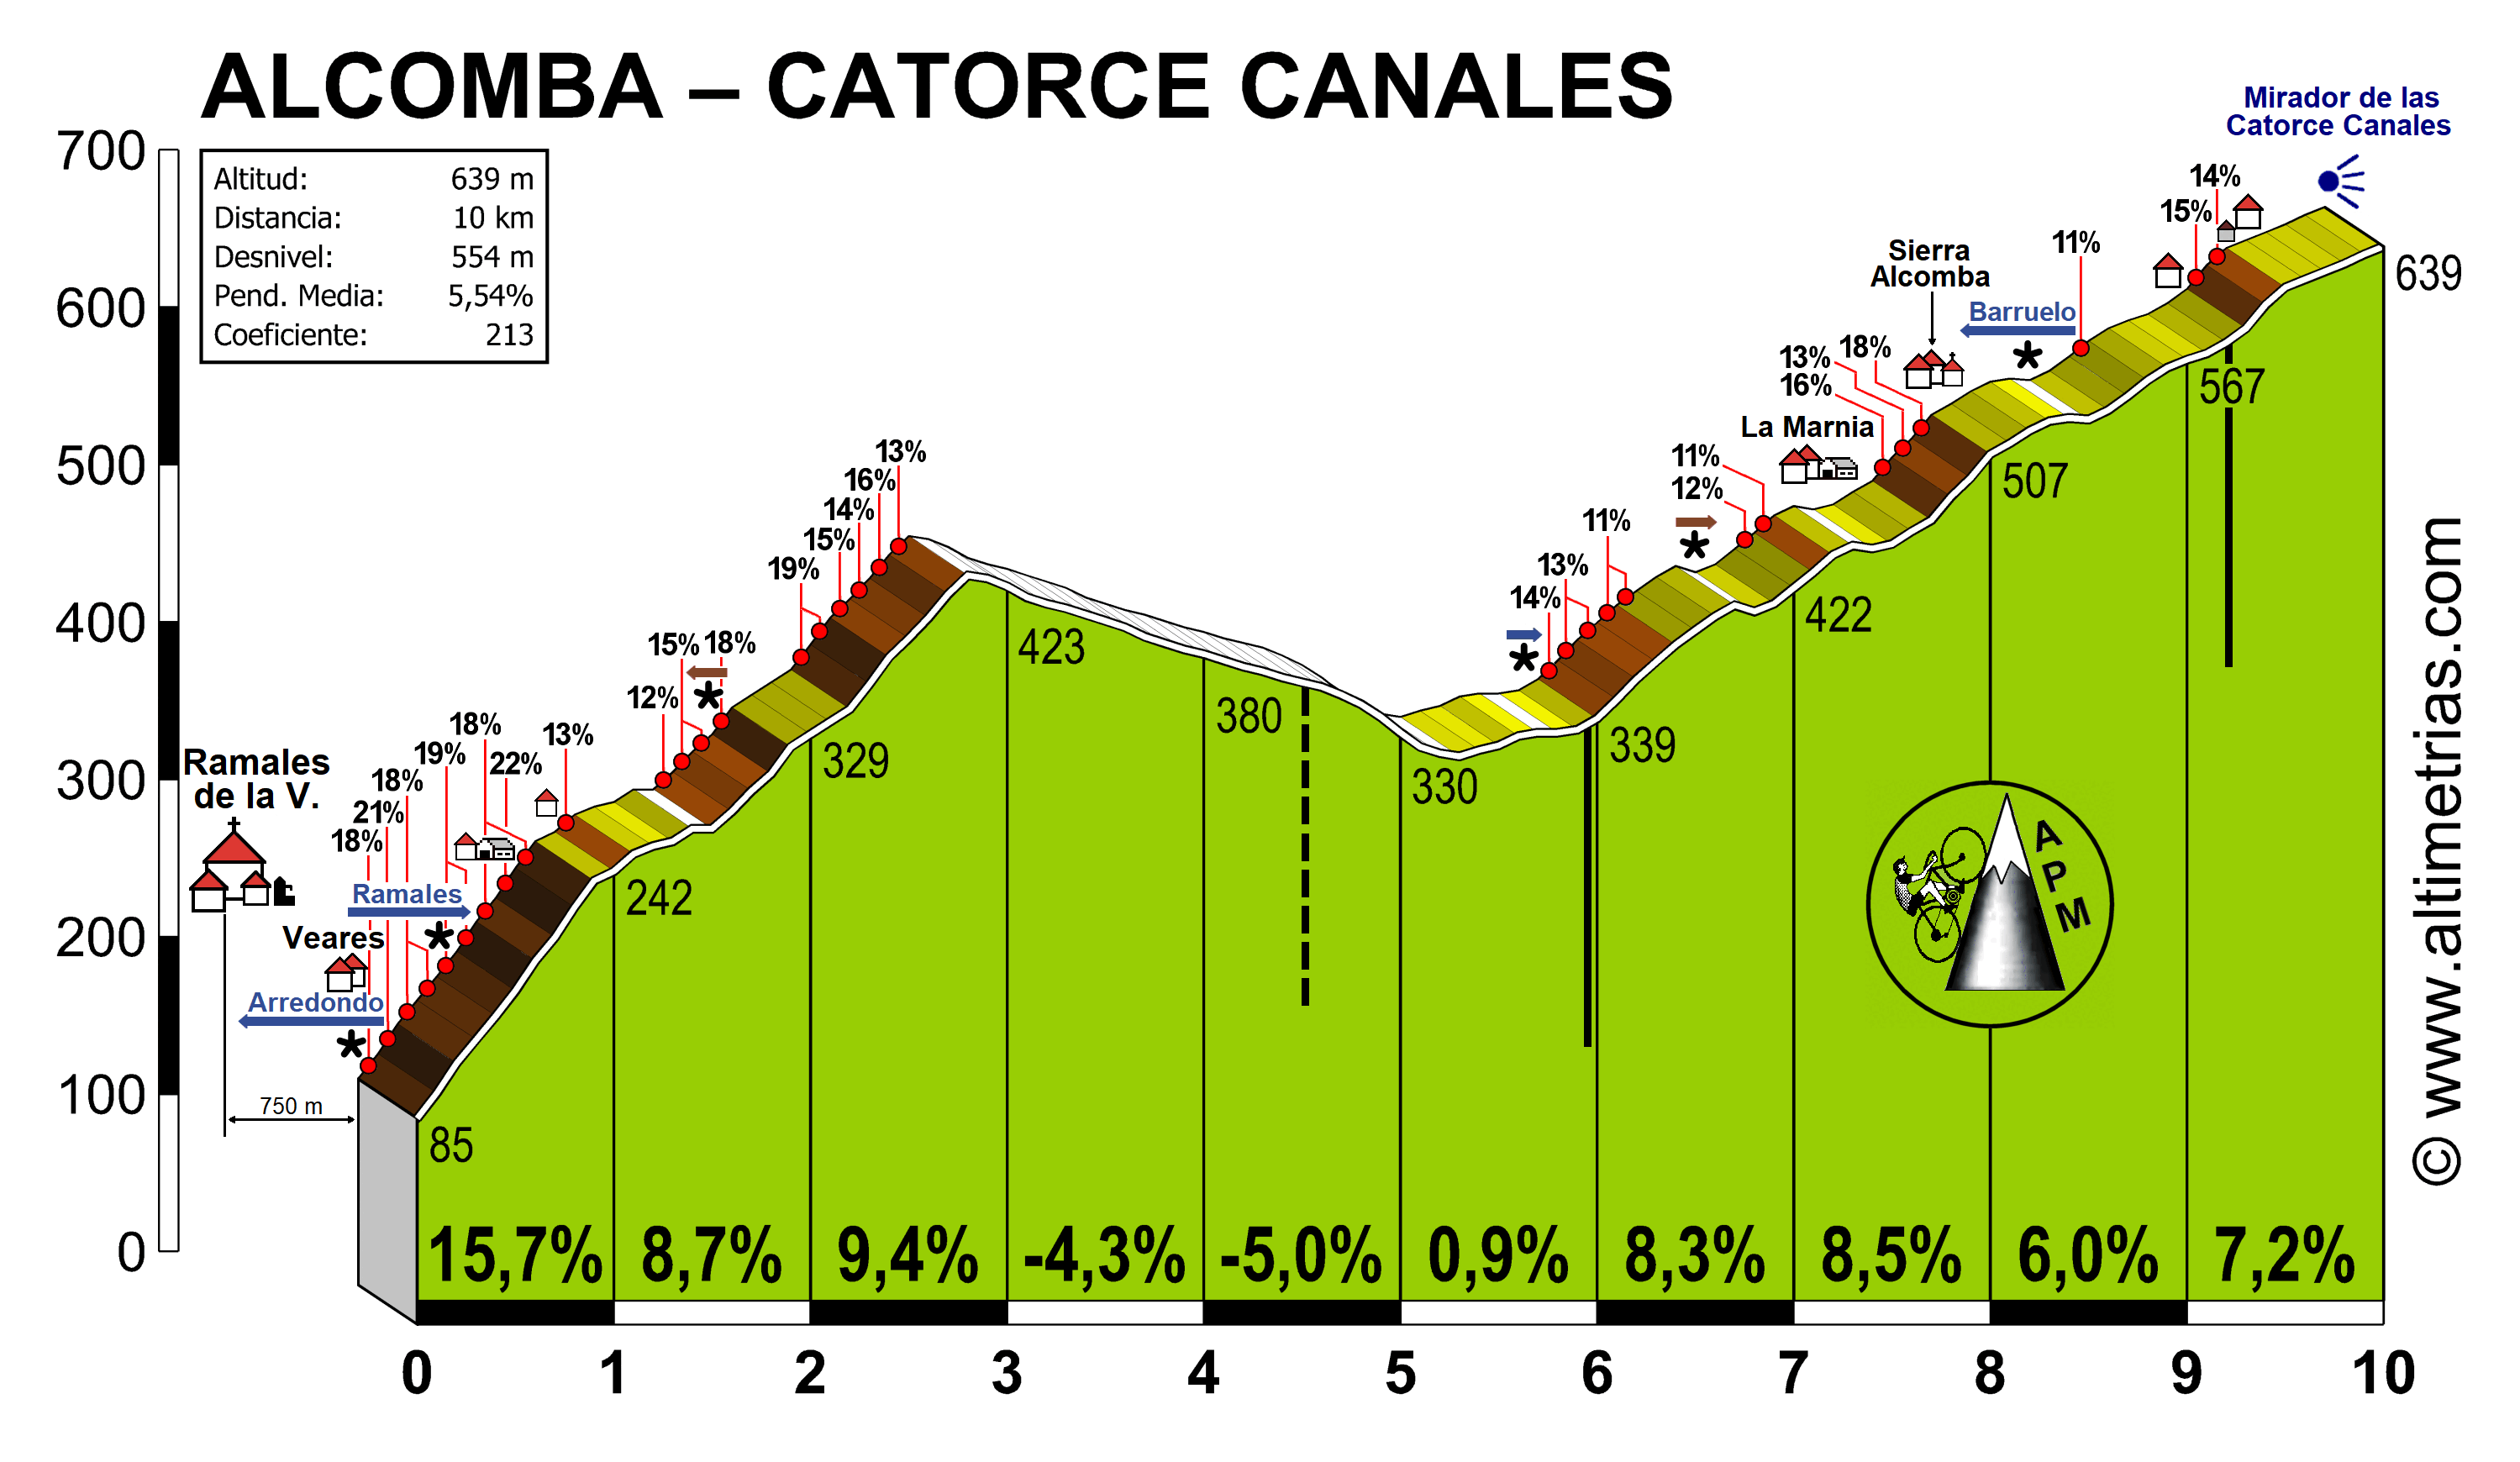 Alcomba-Catorce Canales